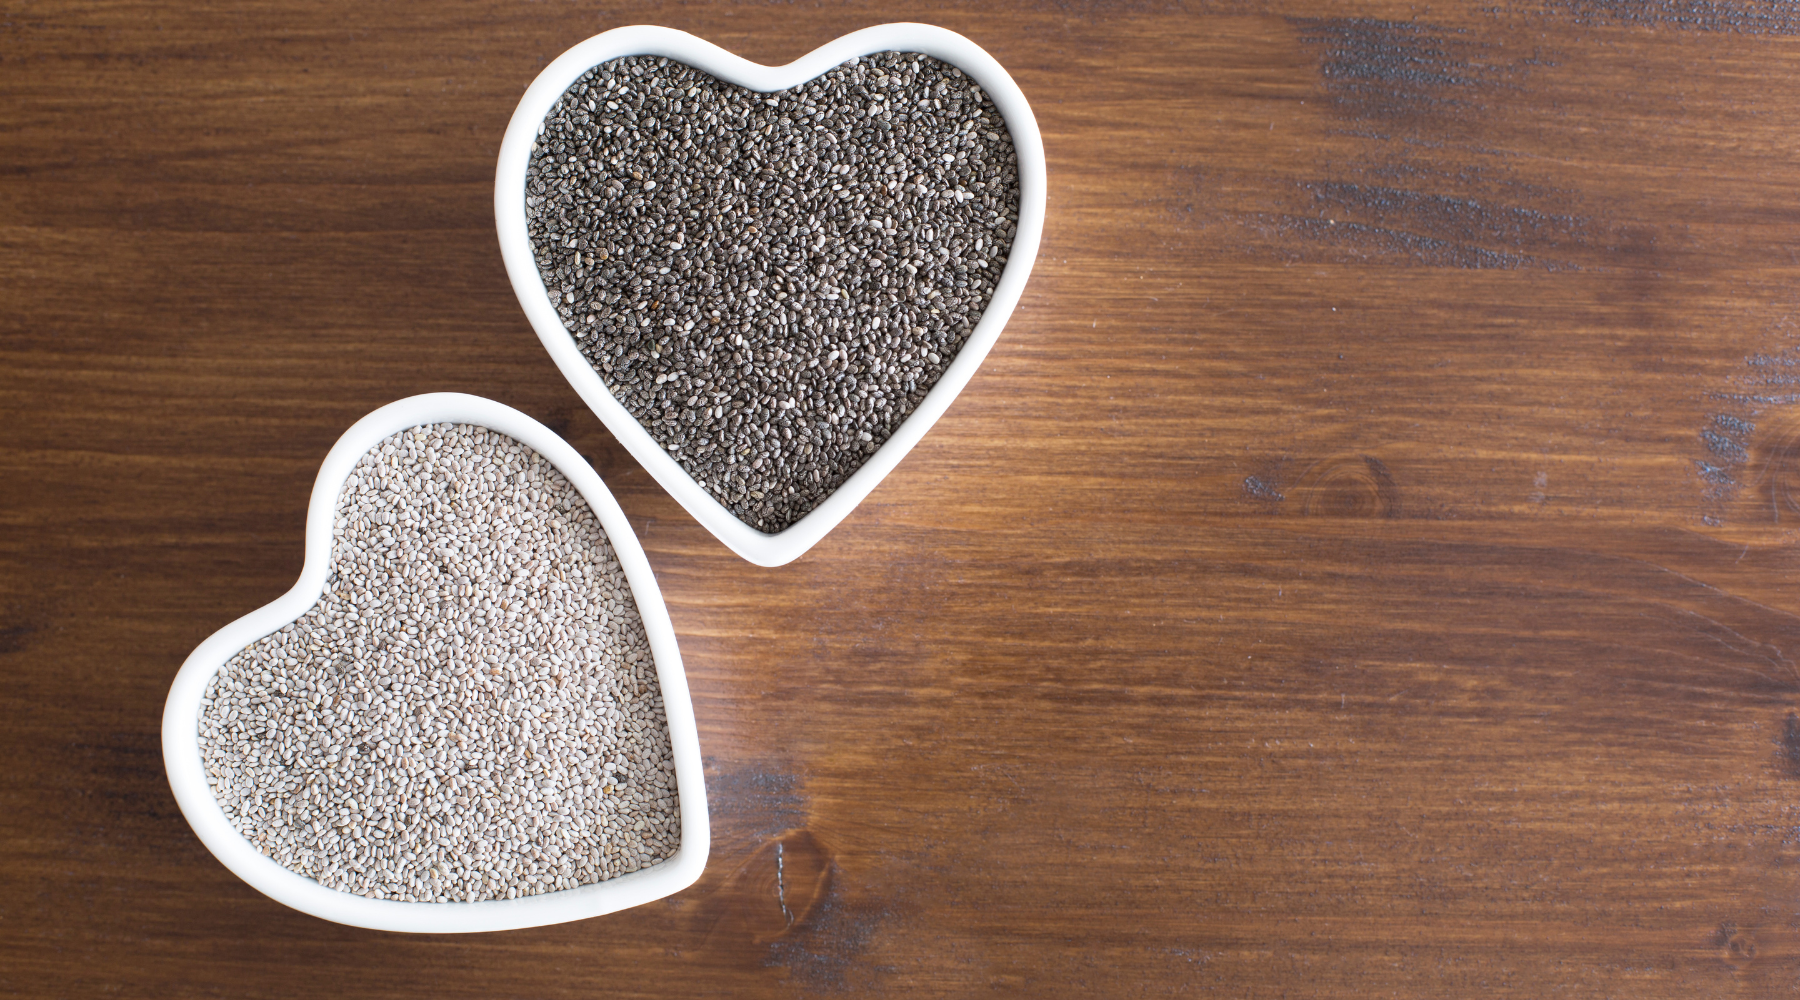 Chia seeds in heart-shaped bowls on a wooden table, with white and black chia seeds side by side.